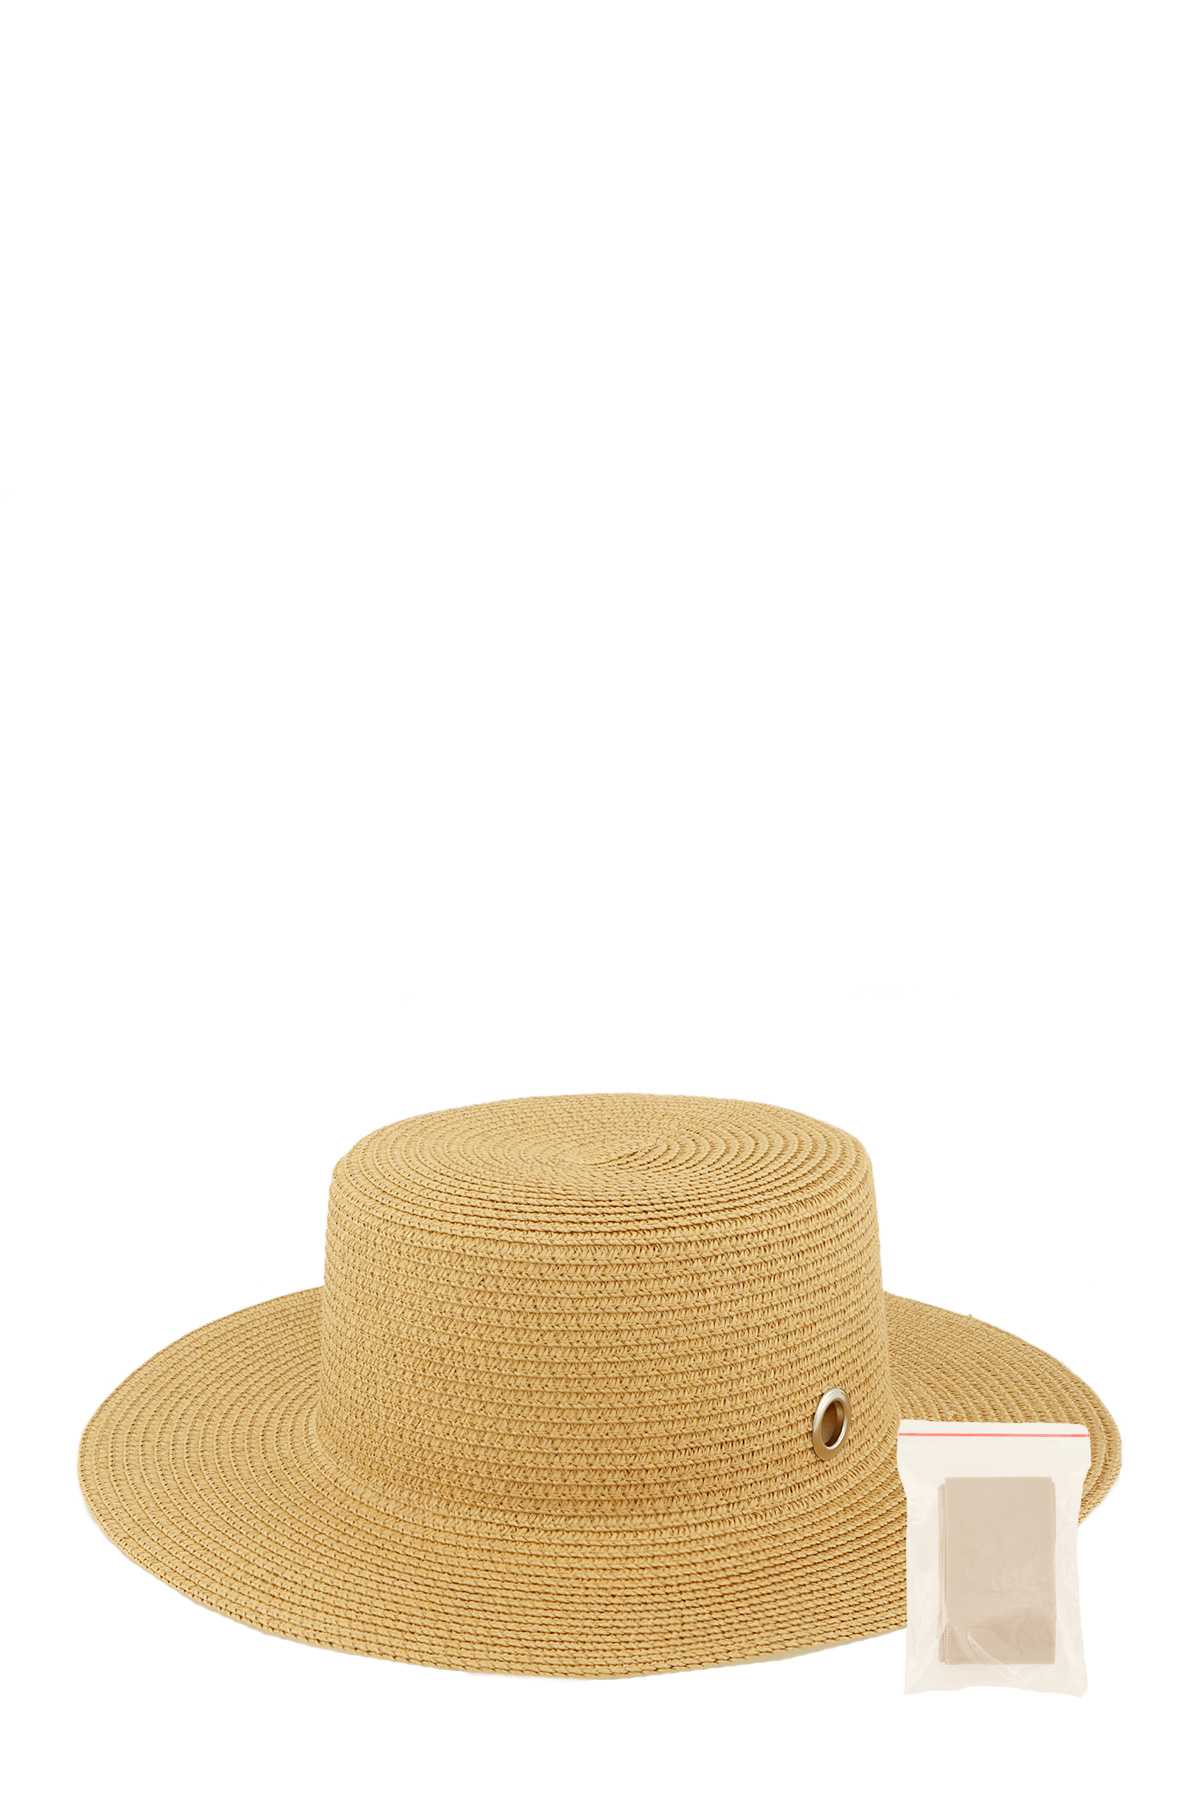 Flat Top Straw Hat with Satin Tie